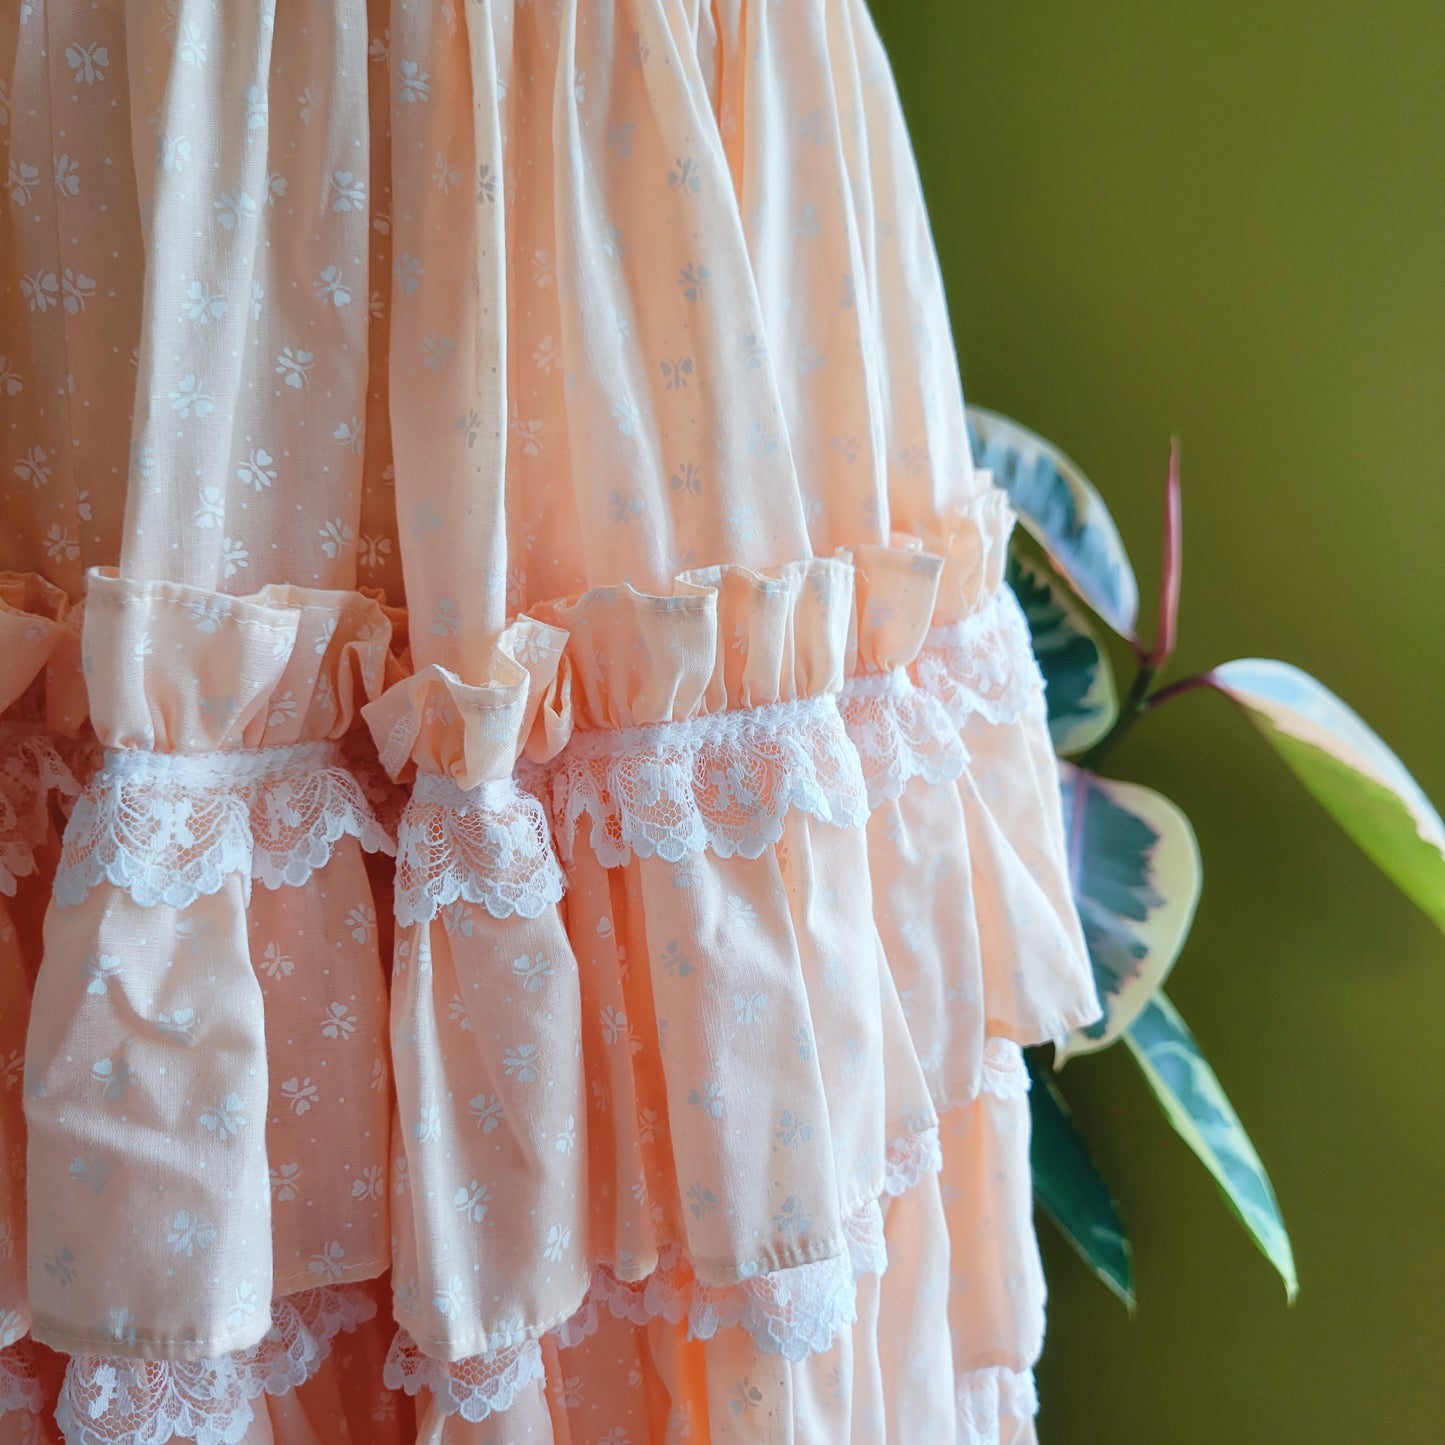 Peach and Lace Vintage Hand Made Tiered Ruffle Skirt - L-2X